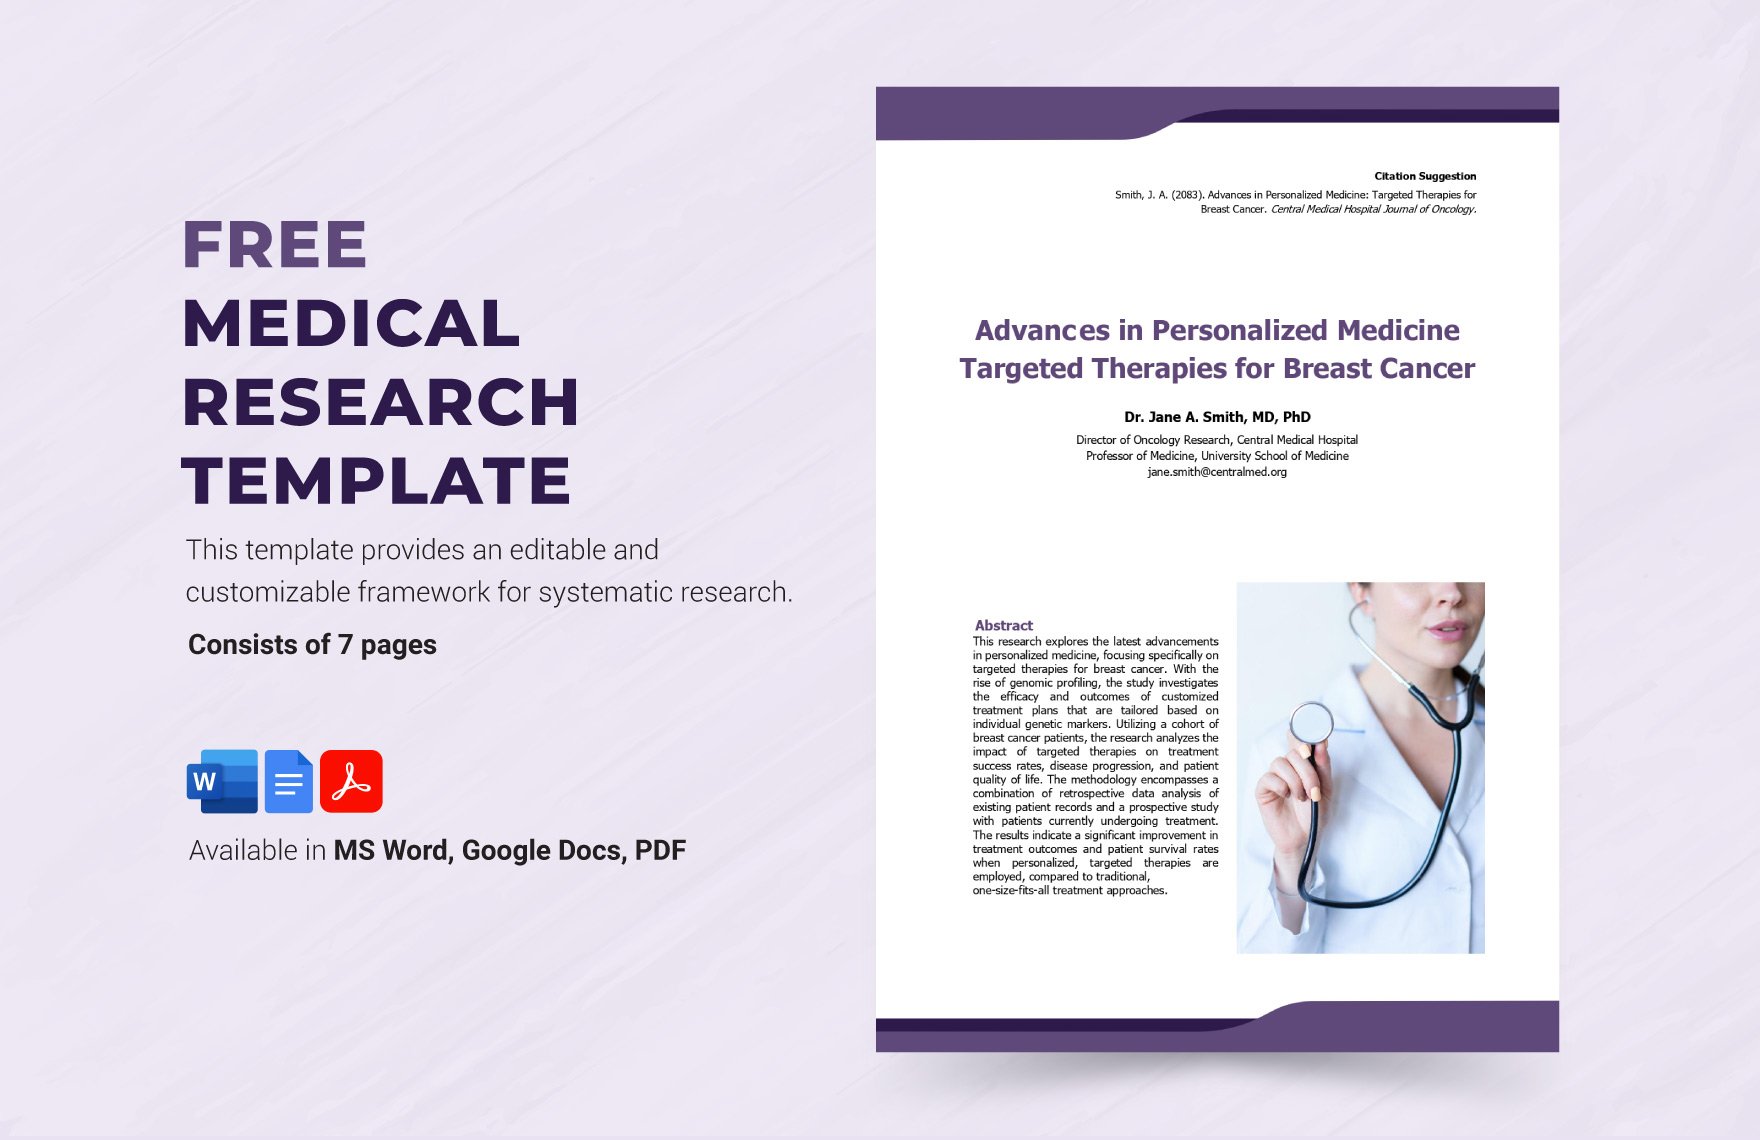 Free Medical Research Template in Word, Google Docs, PDF